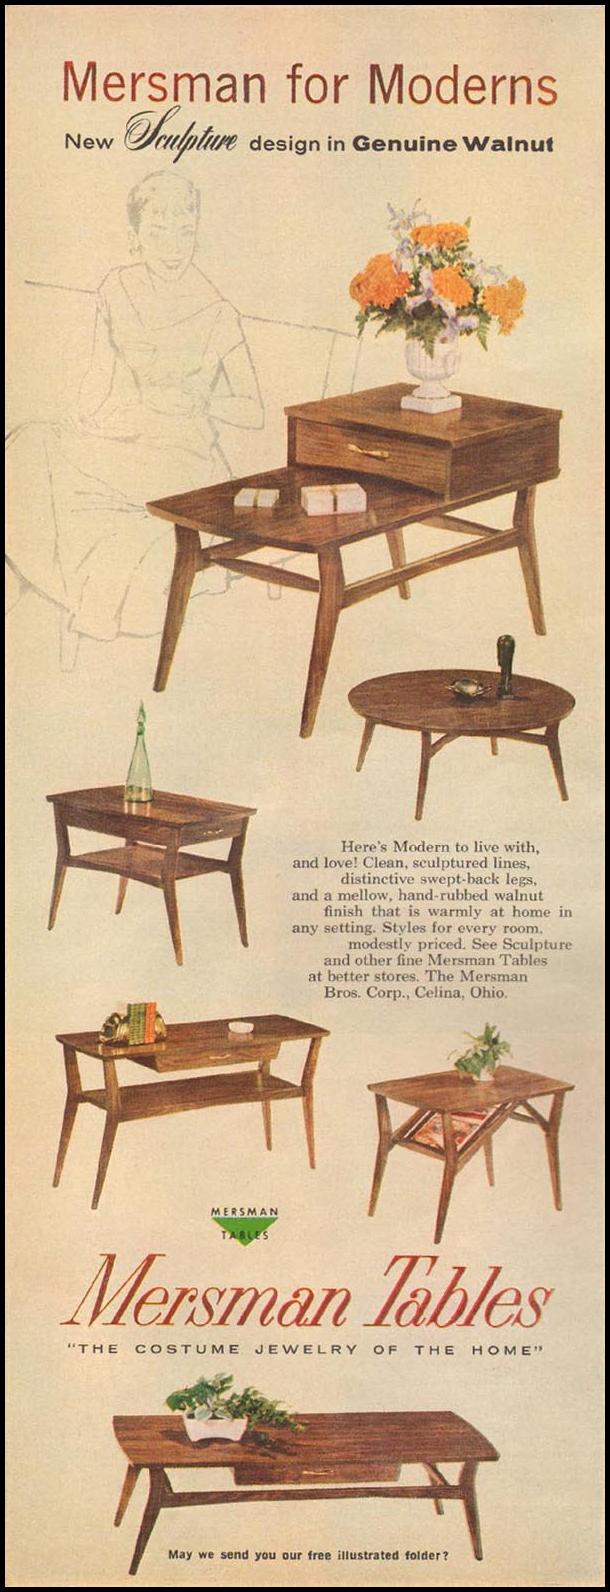 MERSMAN TABLES
BETTER HOMES AND GARDENS
03/01/1960
p. 116